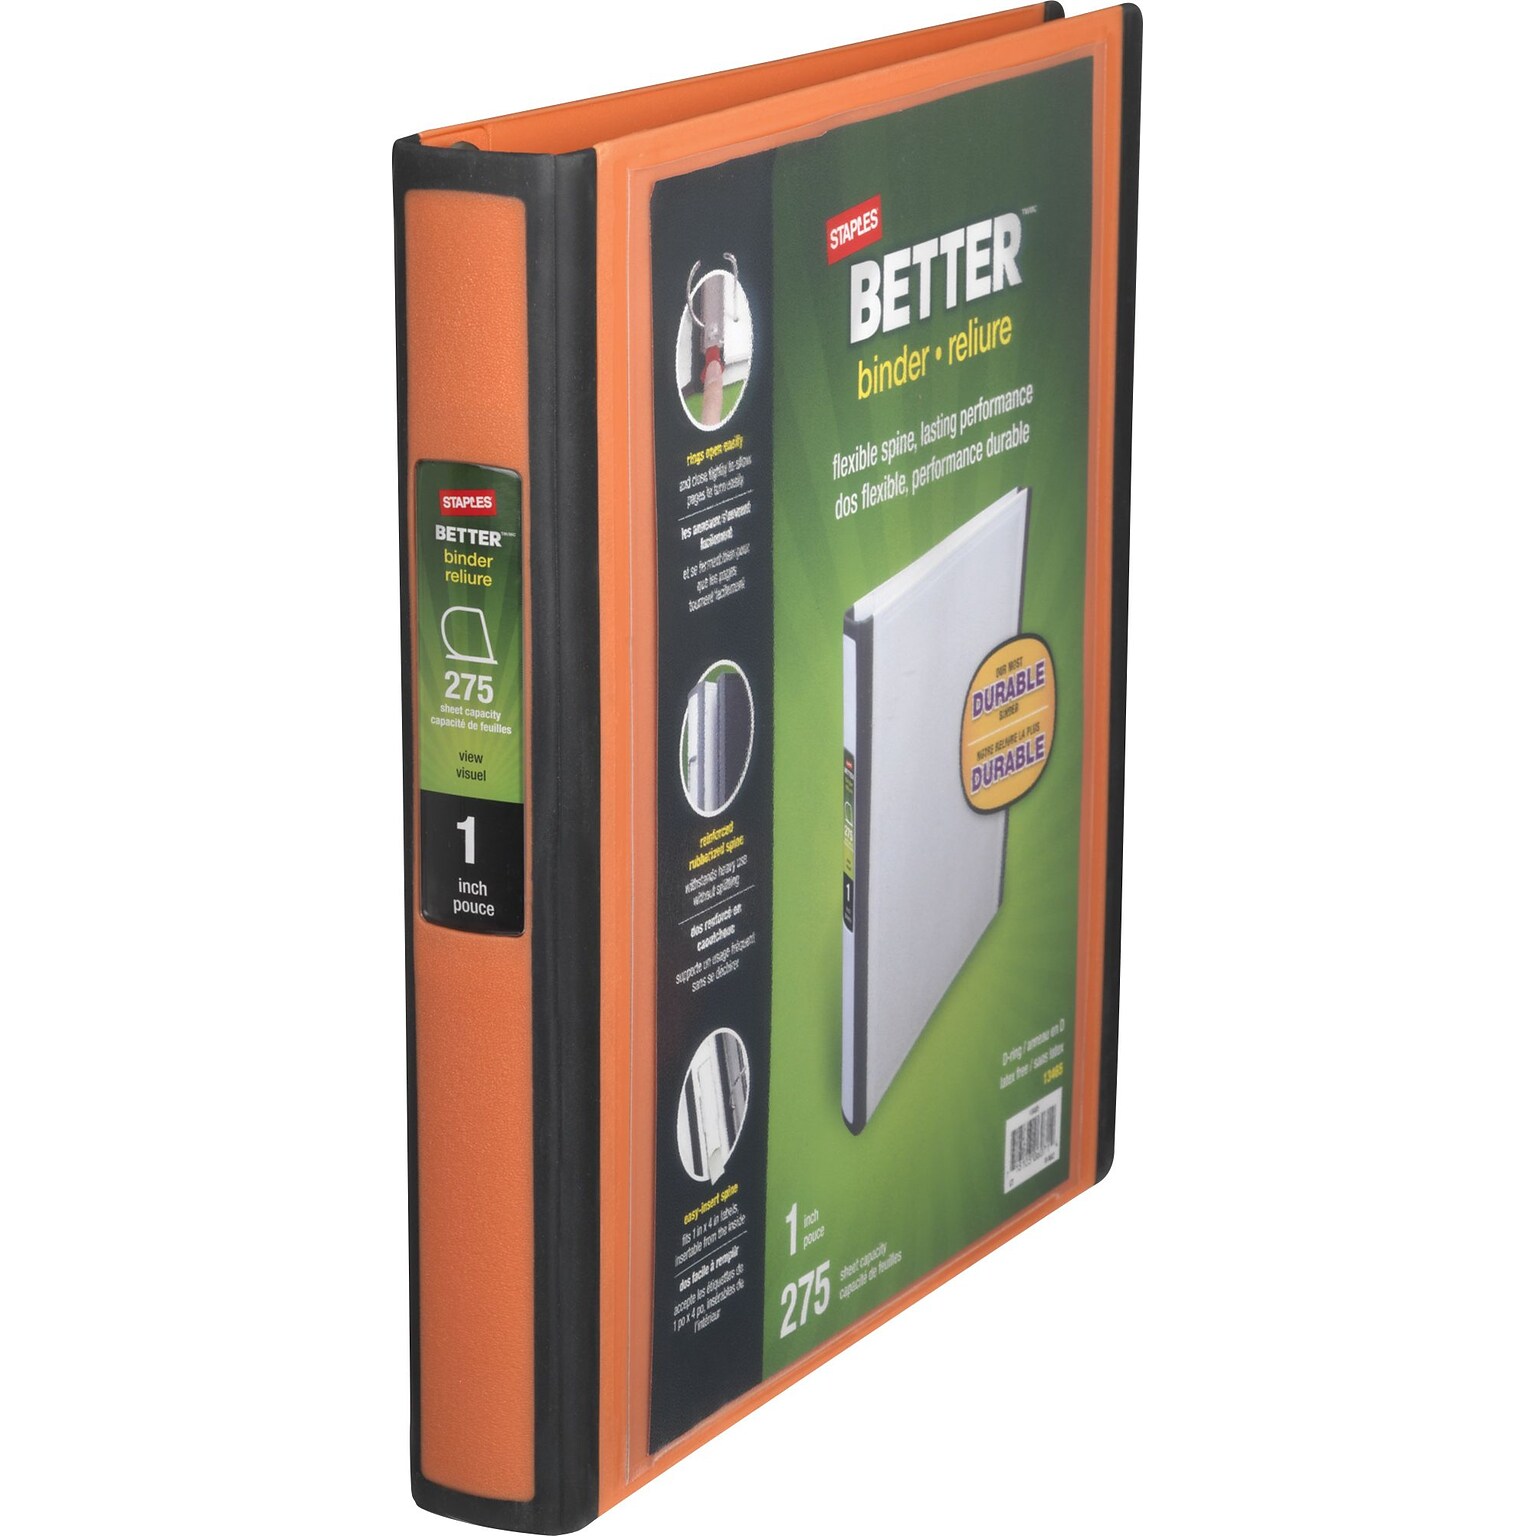 Staples® Better 1 3 Ring View Binder with D-Rings, Orange (13465-CC)